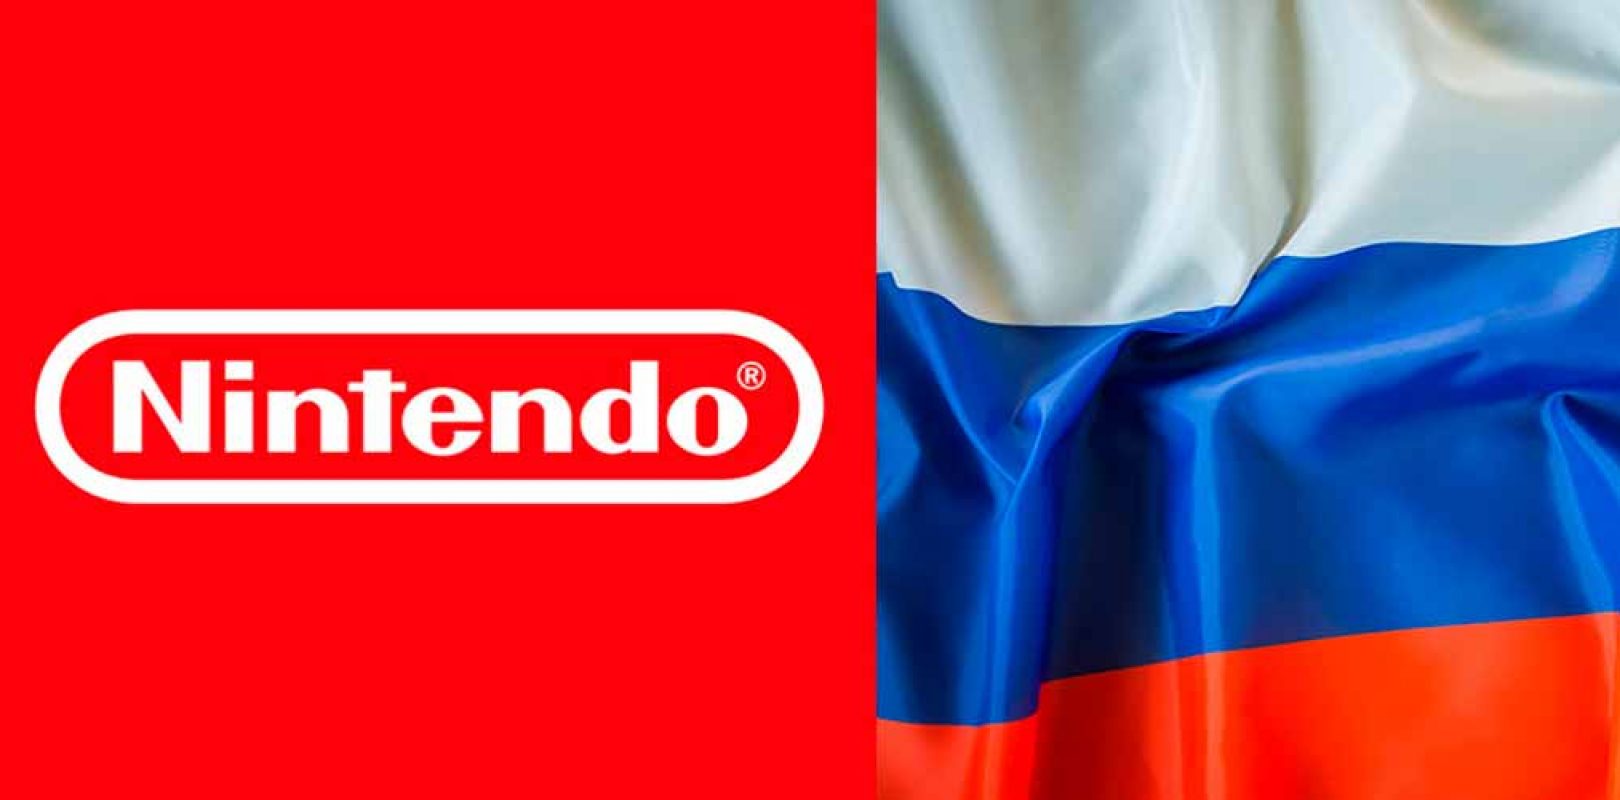 Nintendo also says "Goodbye" to Russia